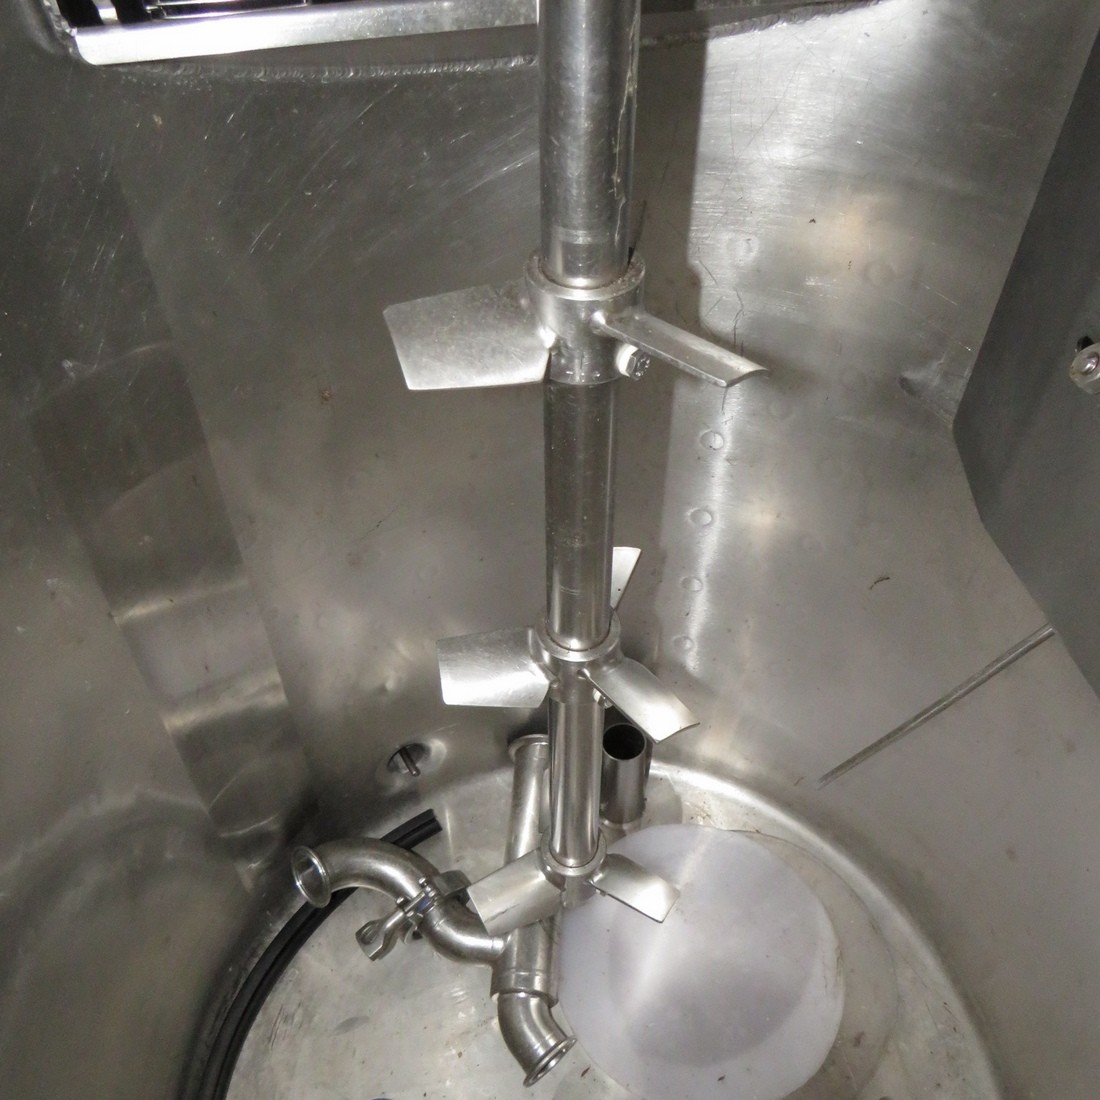 R6MA6178 Stainless steel Mixing tank - 200 Liters - Double jacket